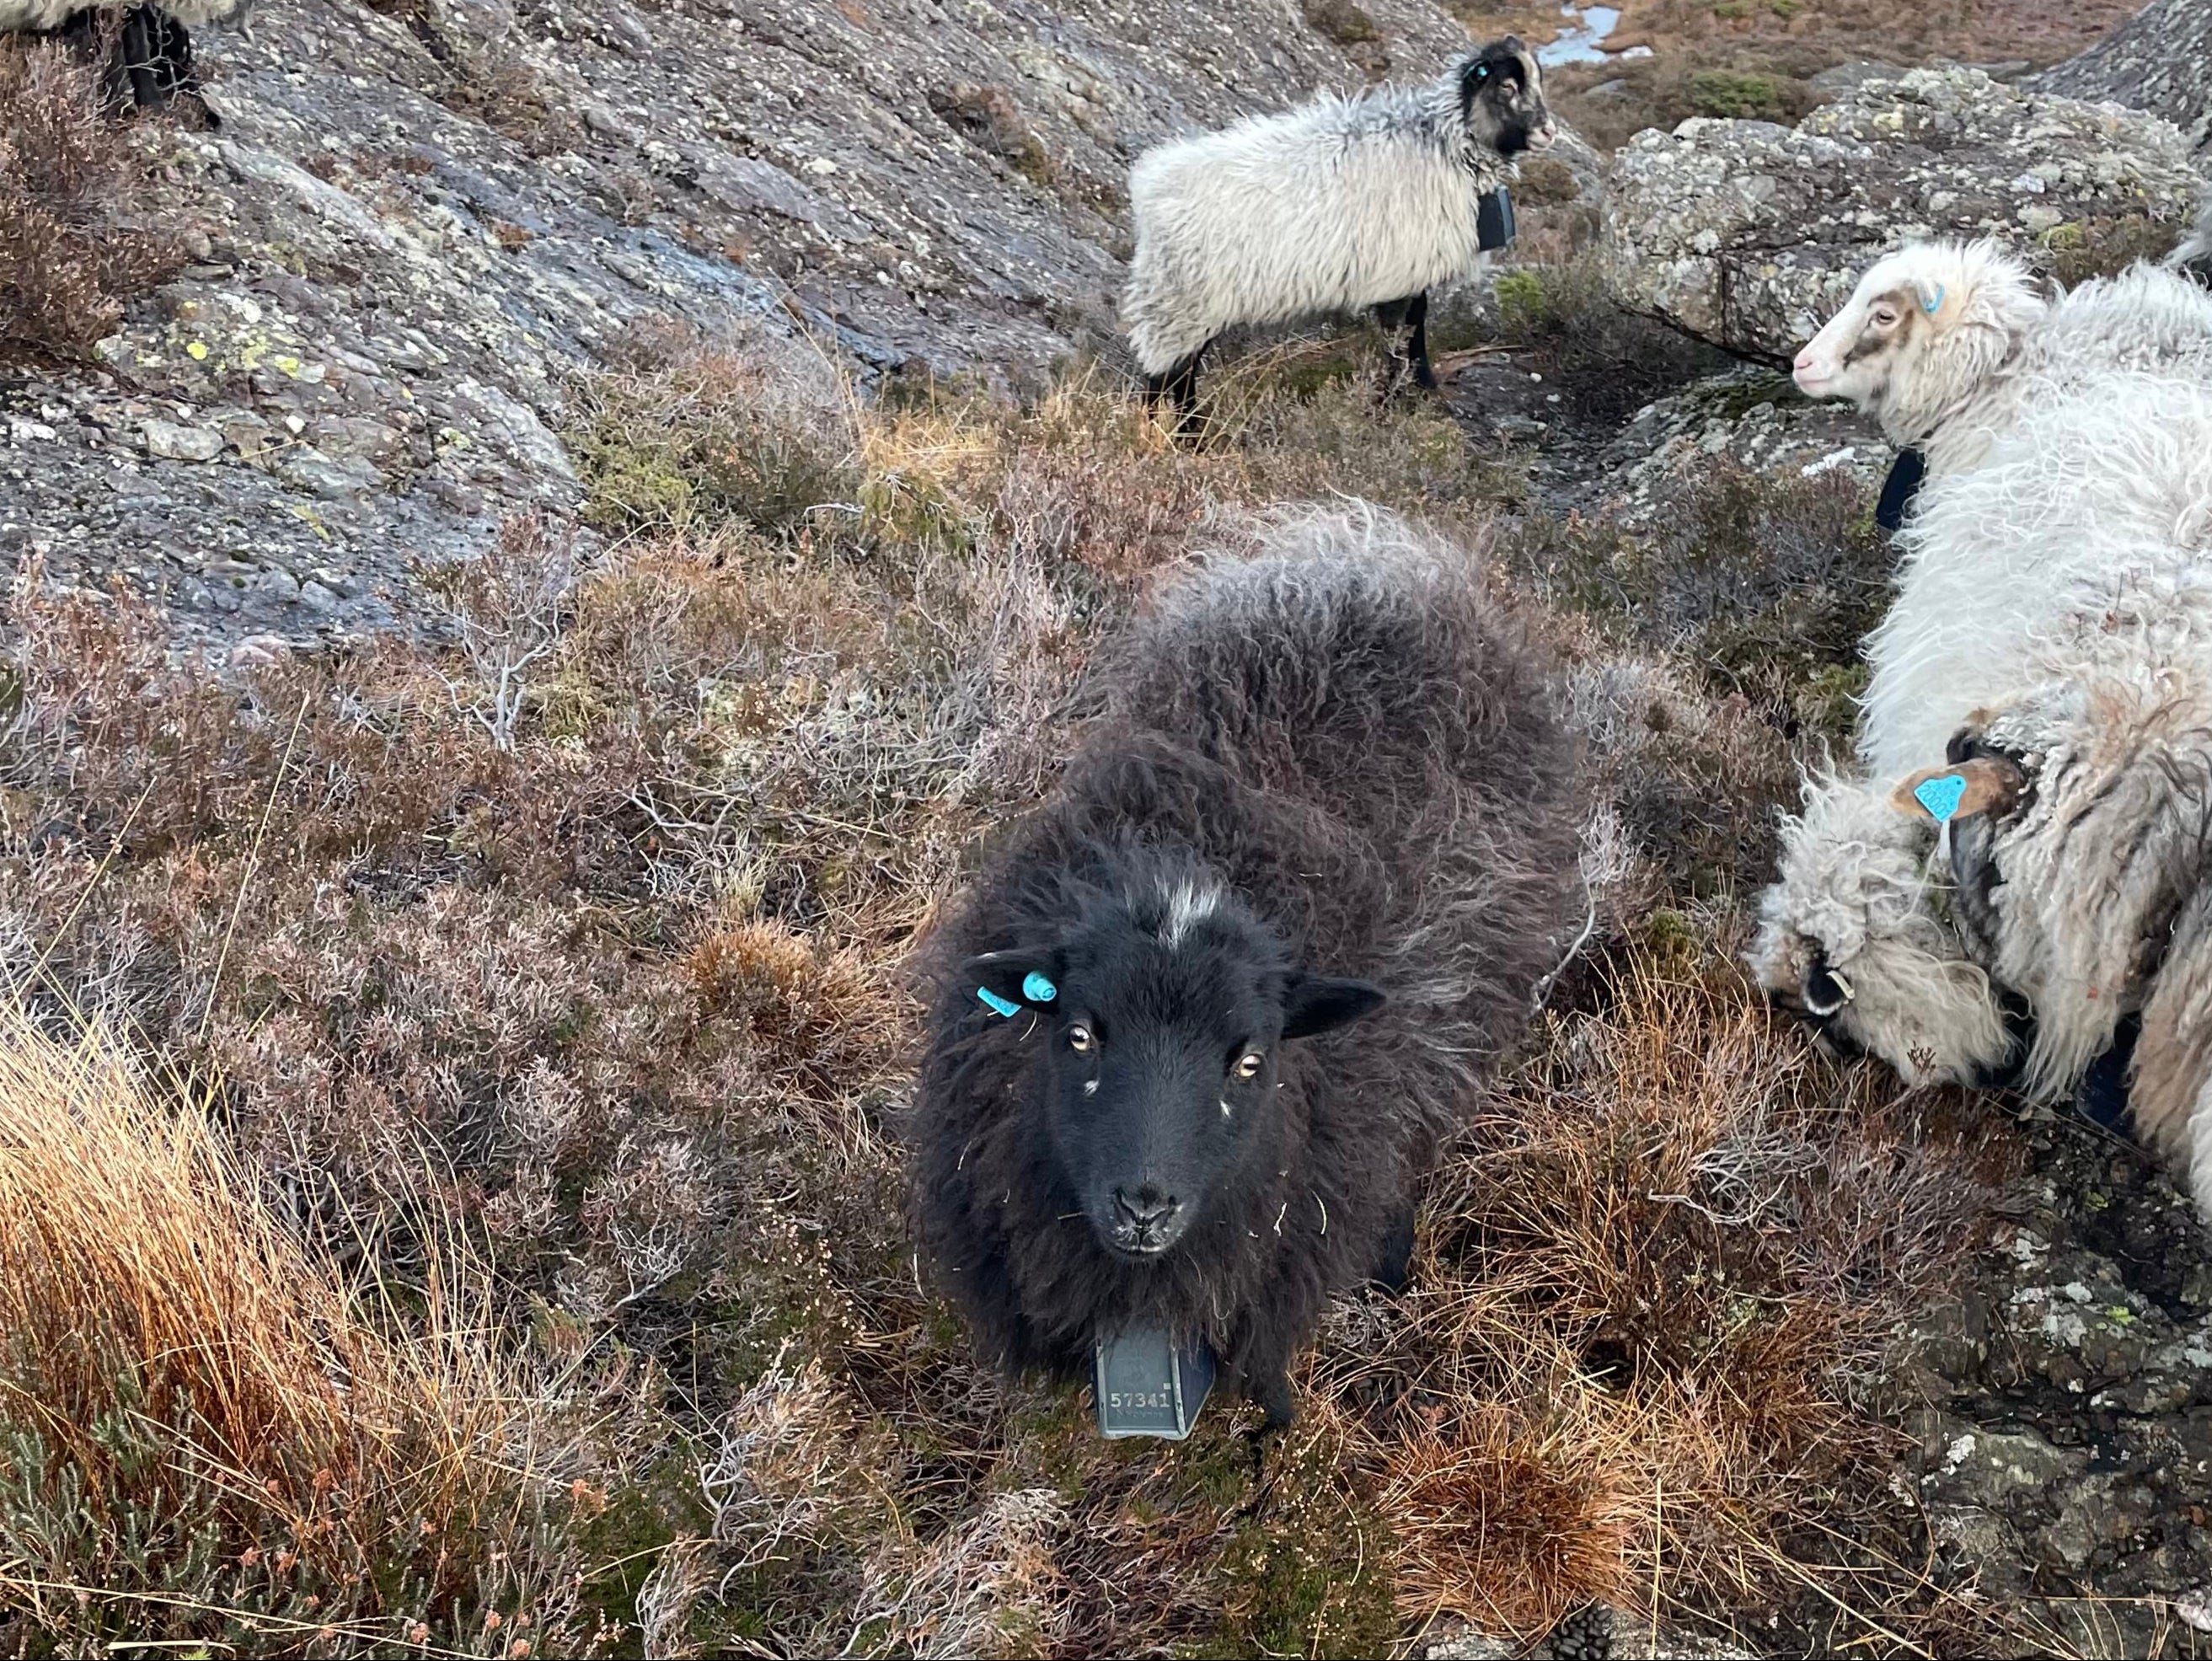 Norwegian wild sheep faced extinction in the 17th century but were brought back from the brink